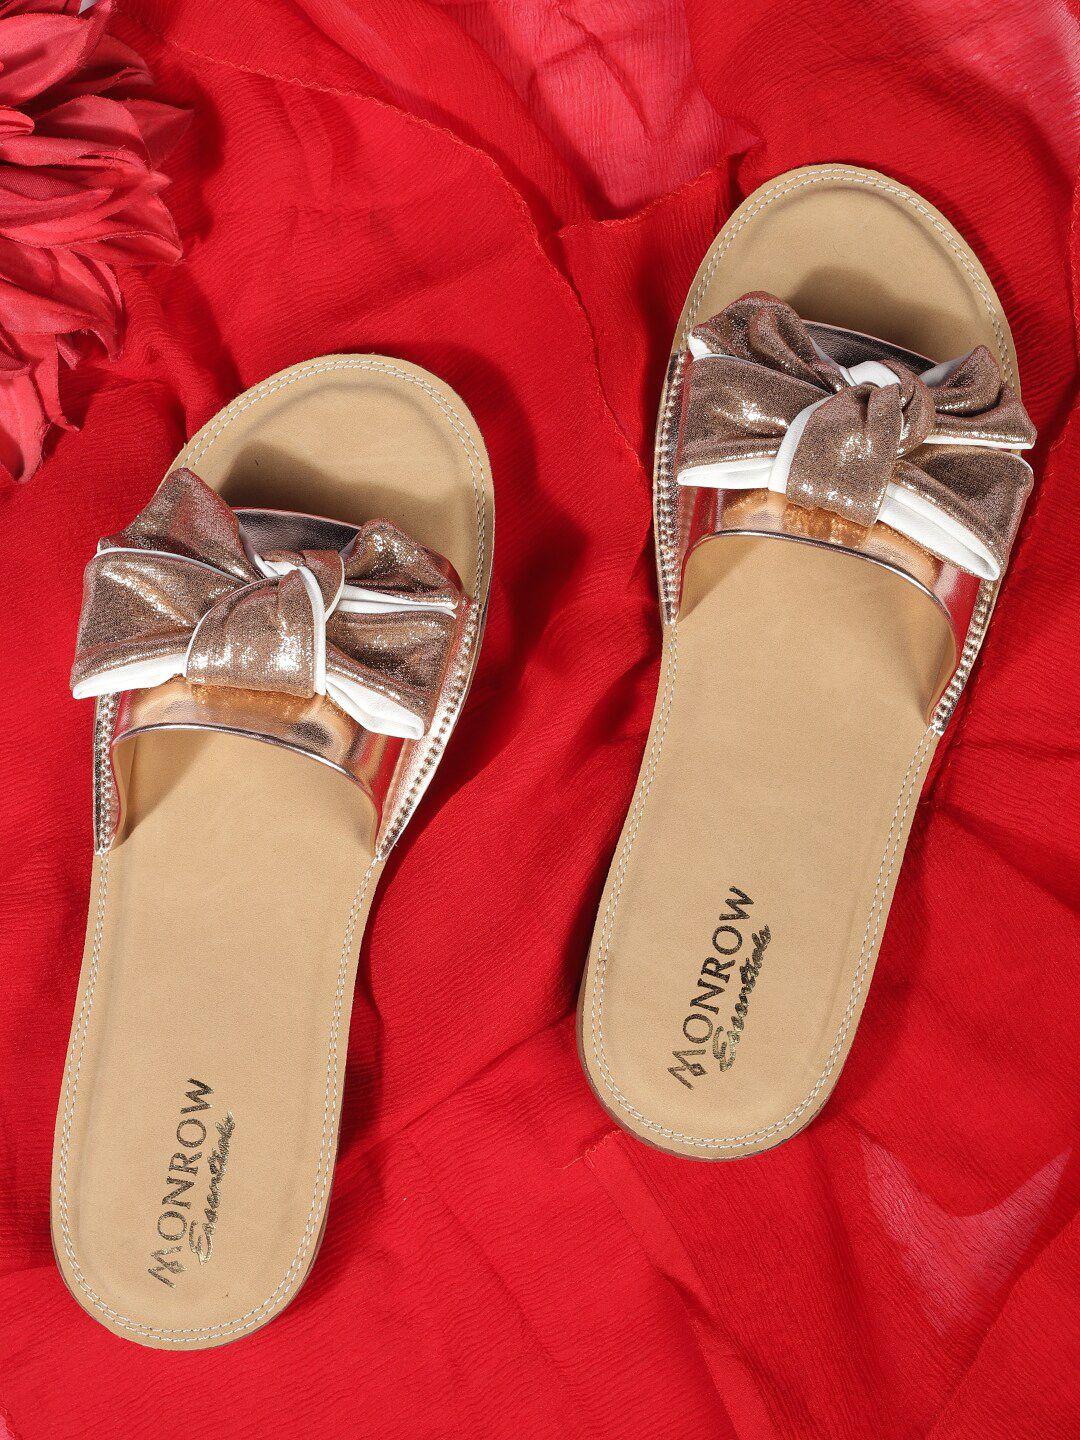 monrow-women-rose-gold-open-toe-flats-with-bow